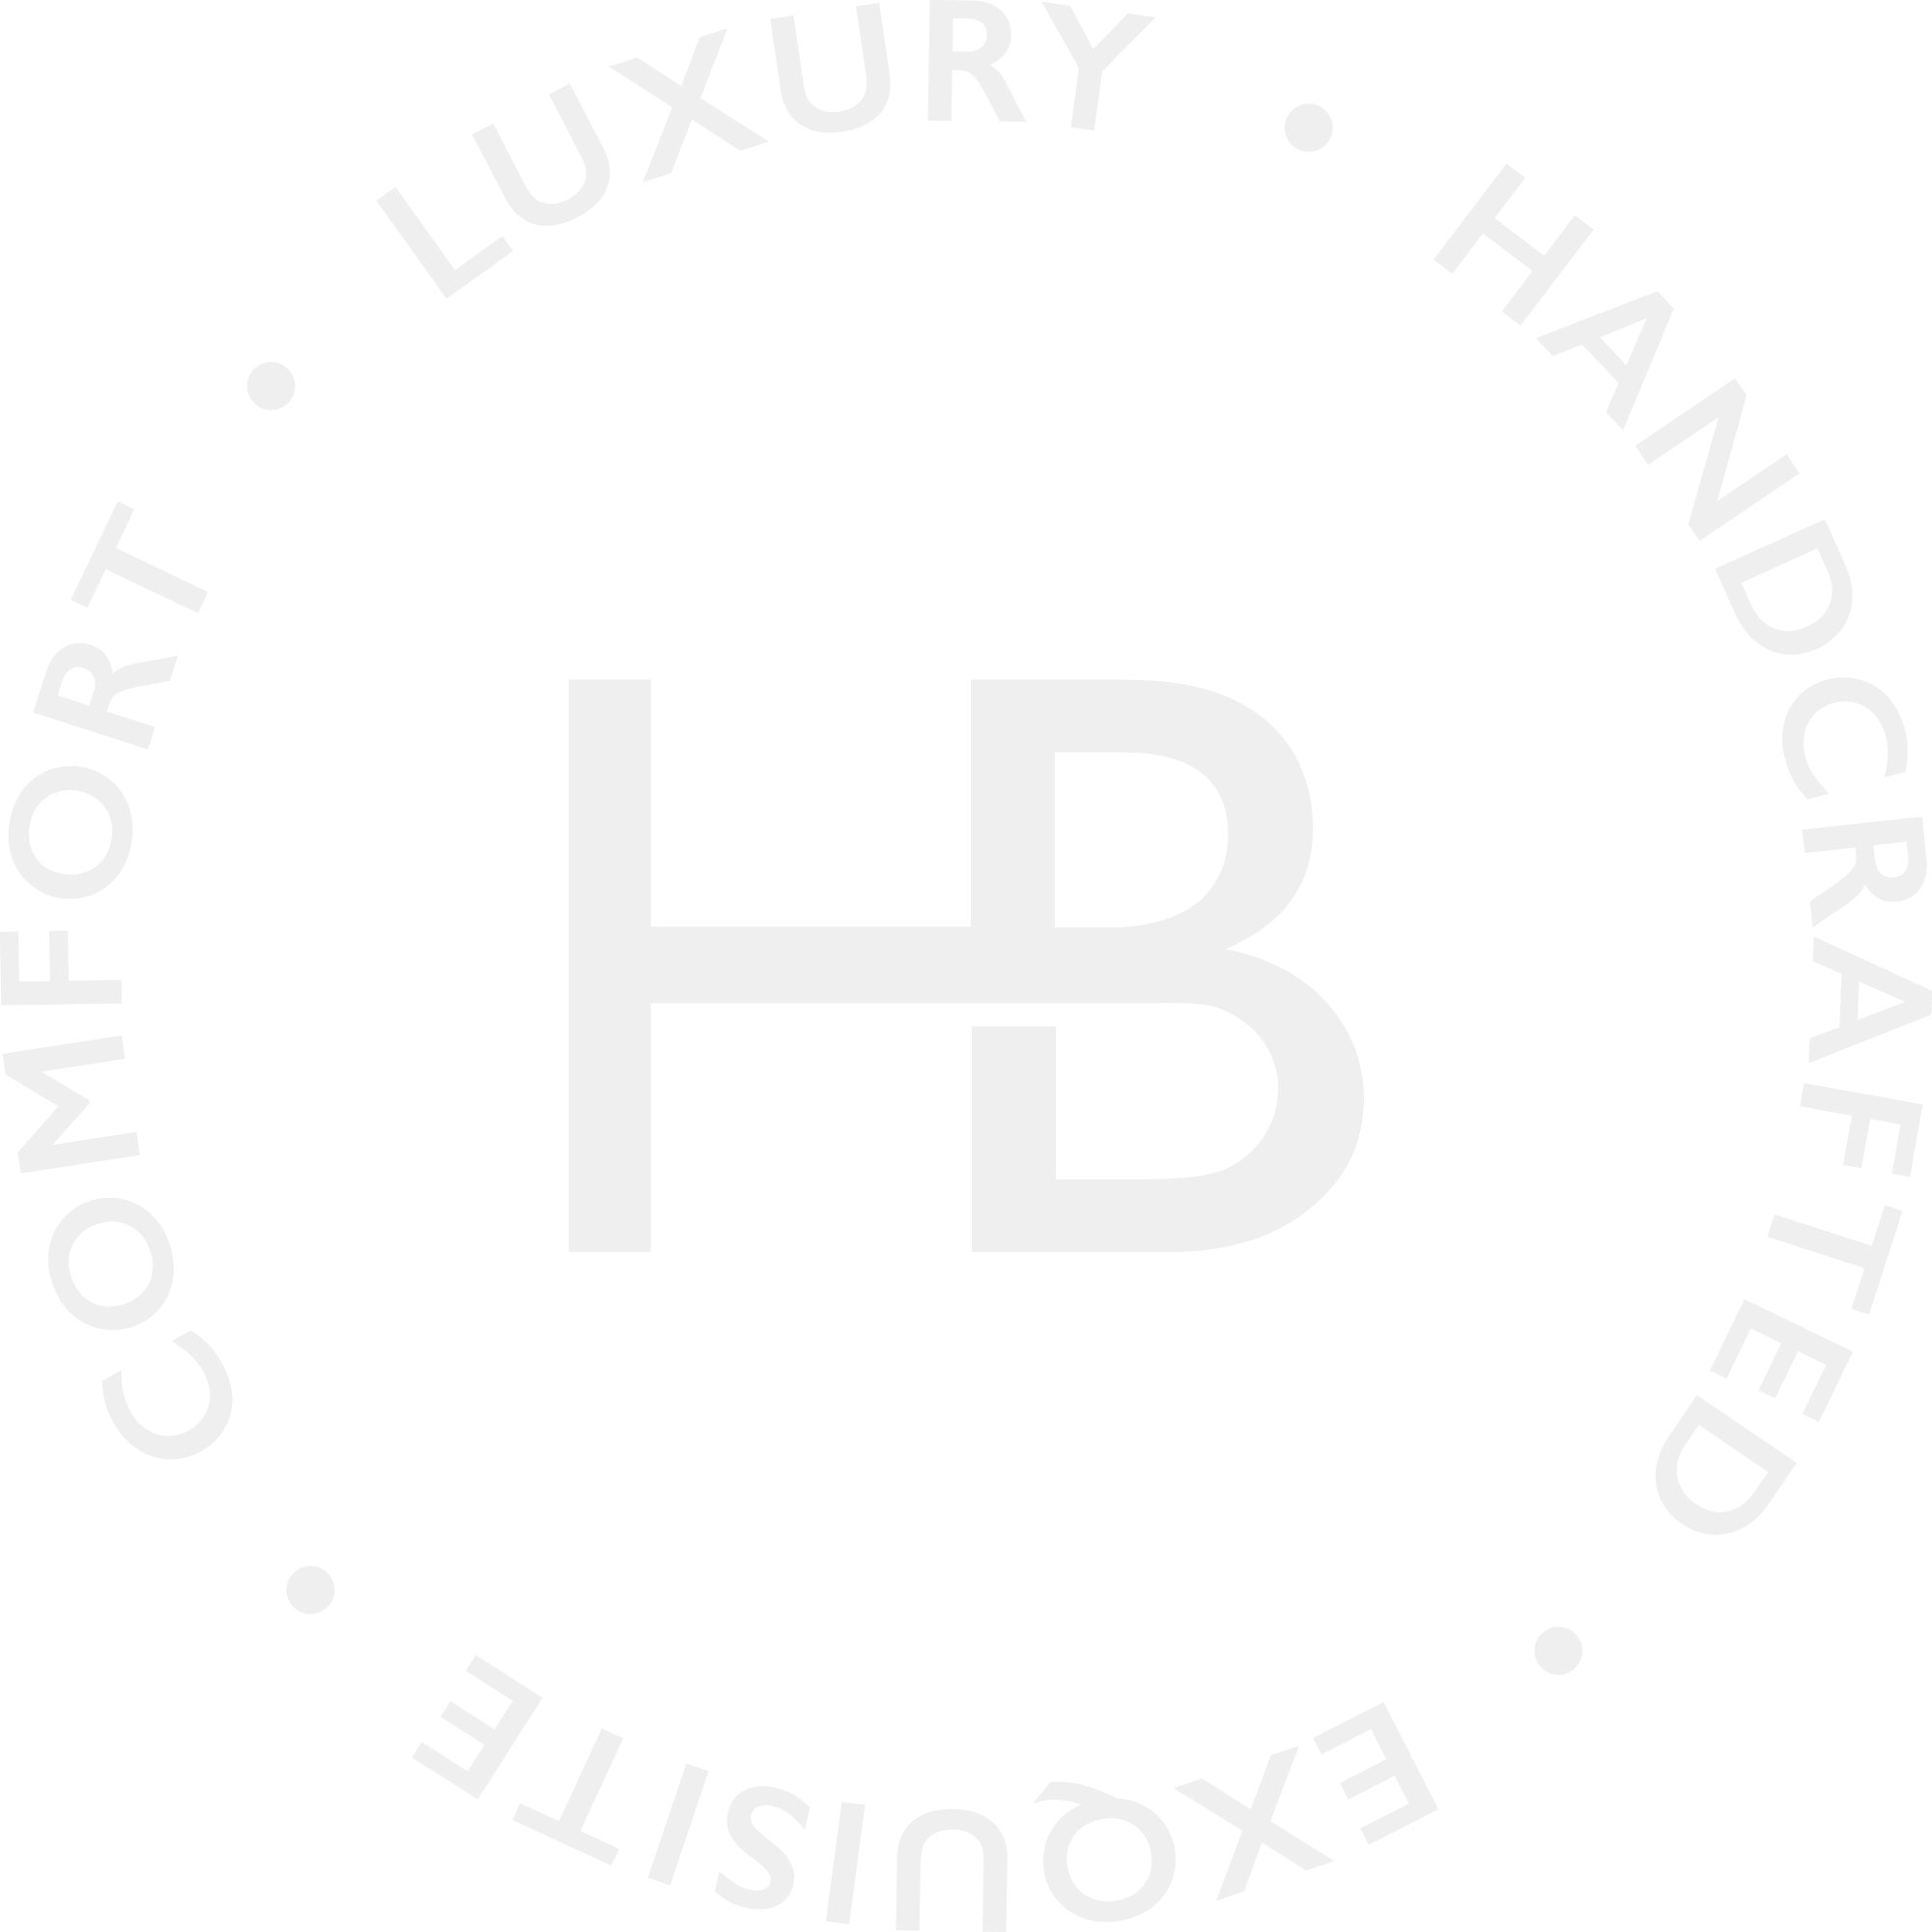 Heritage Bed Co badge